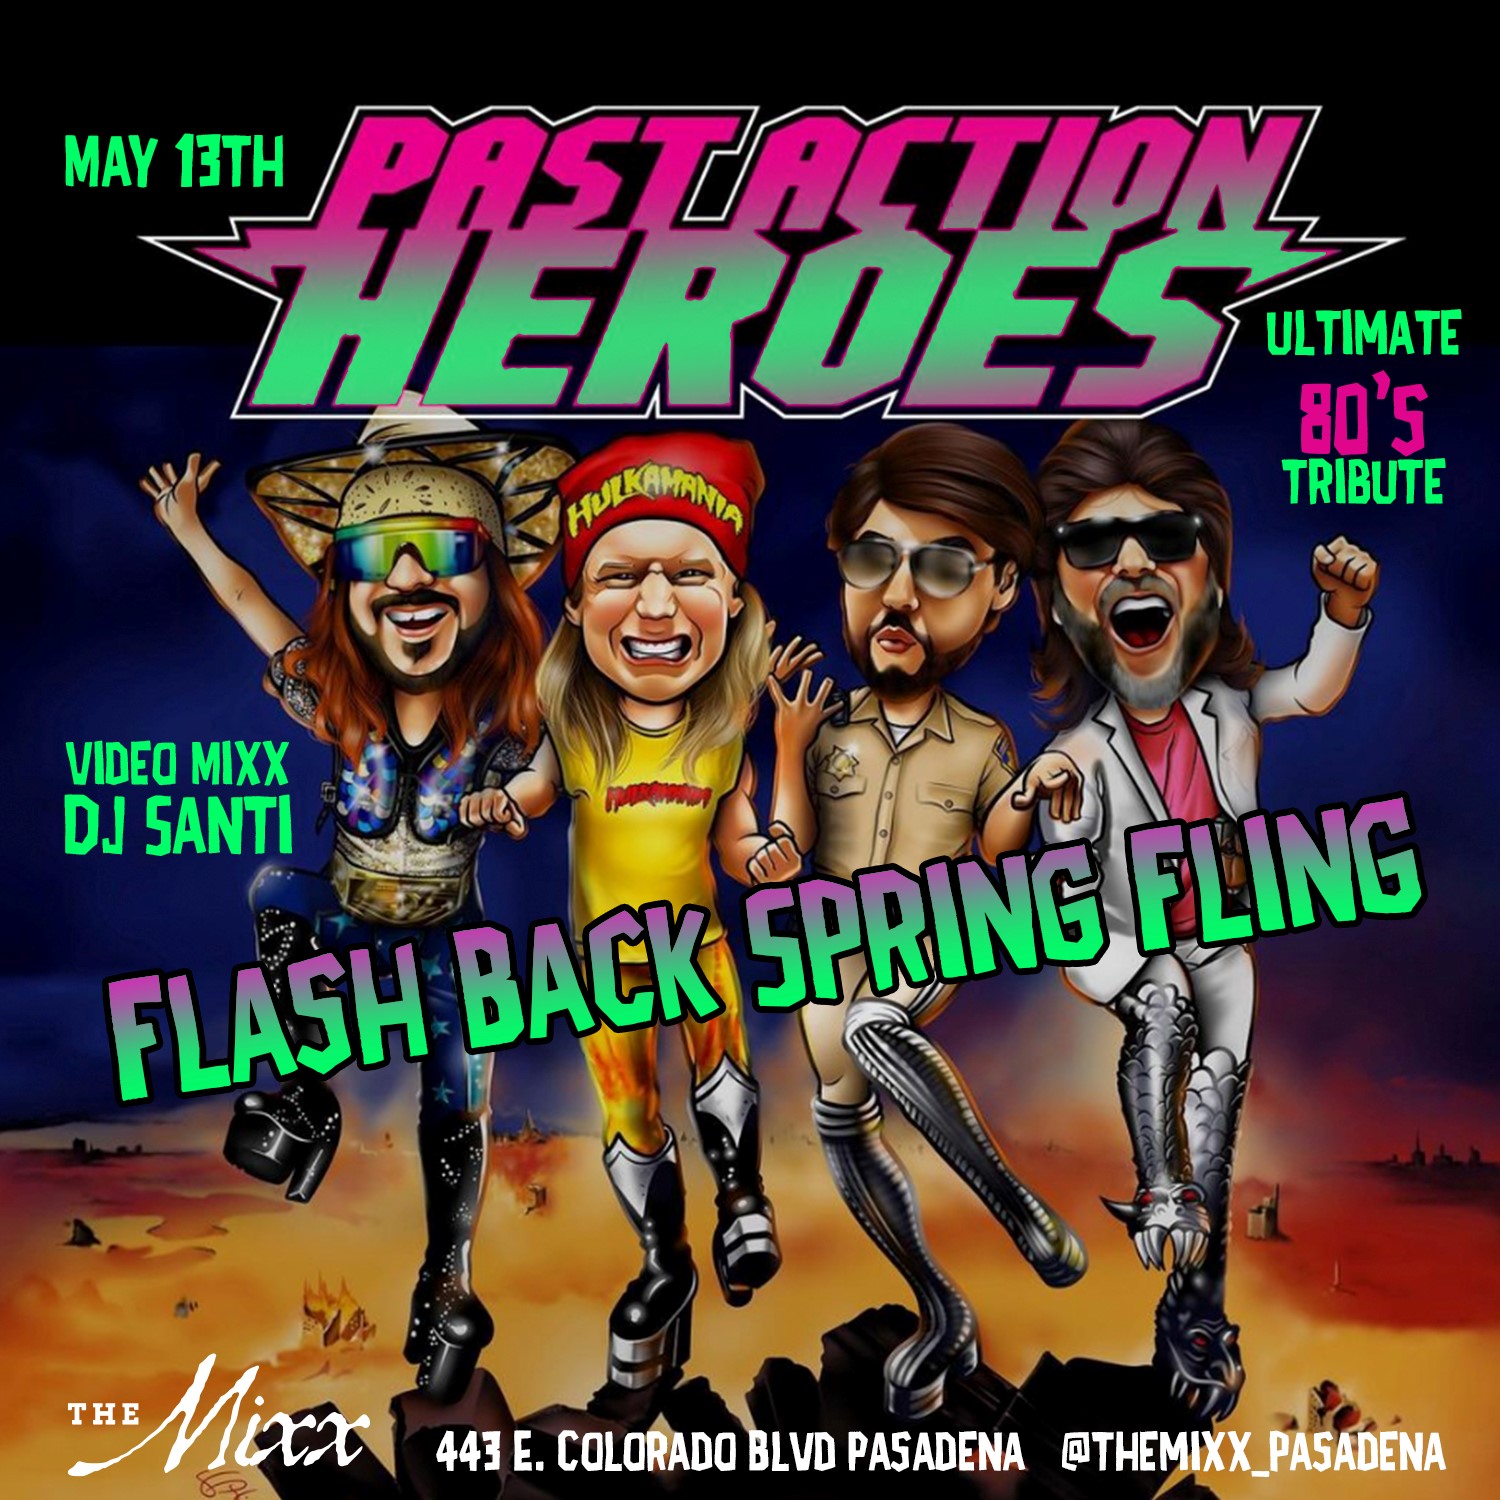 You are currently viewing The Ultimate live 80s and 90s Tribute with PAST ACTION HEROES